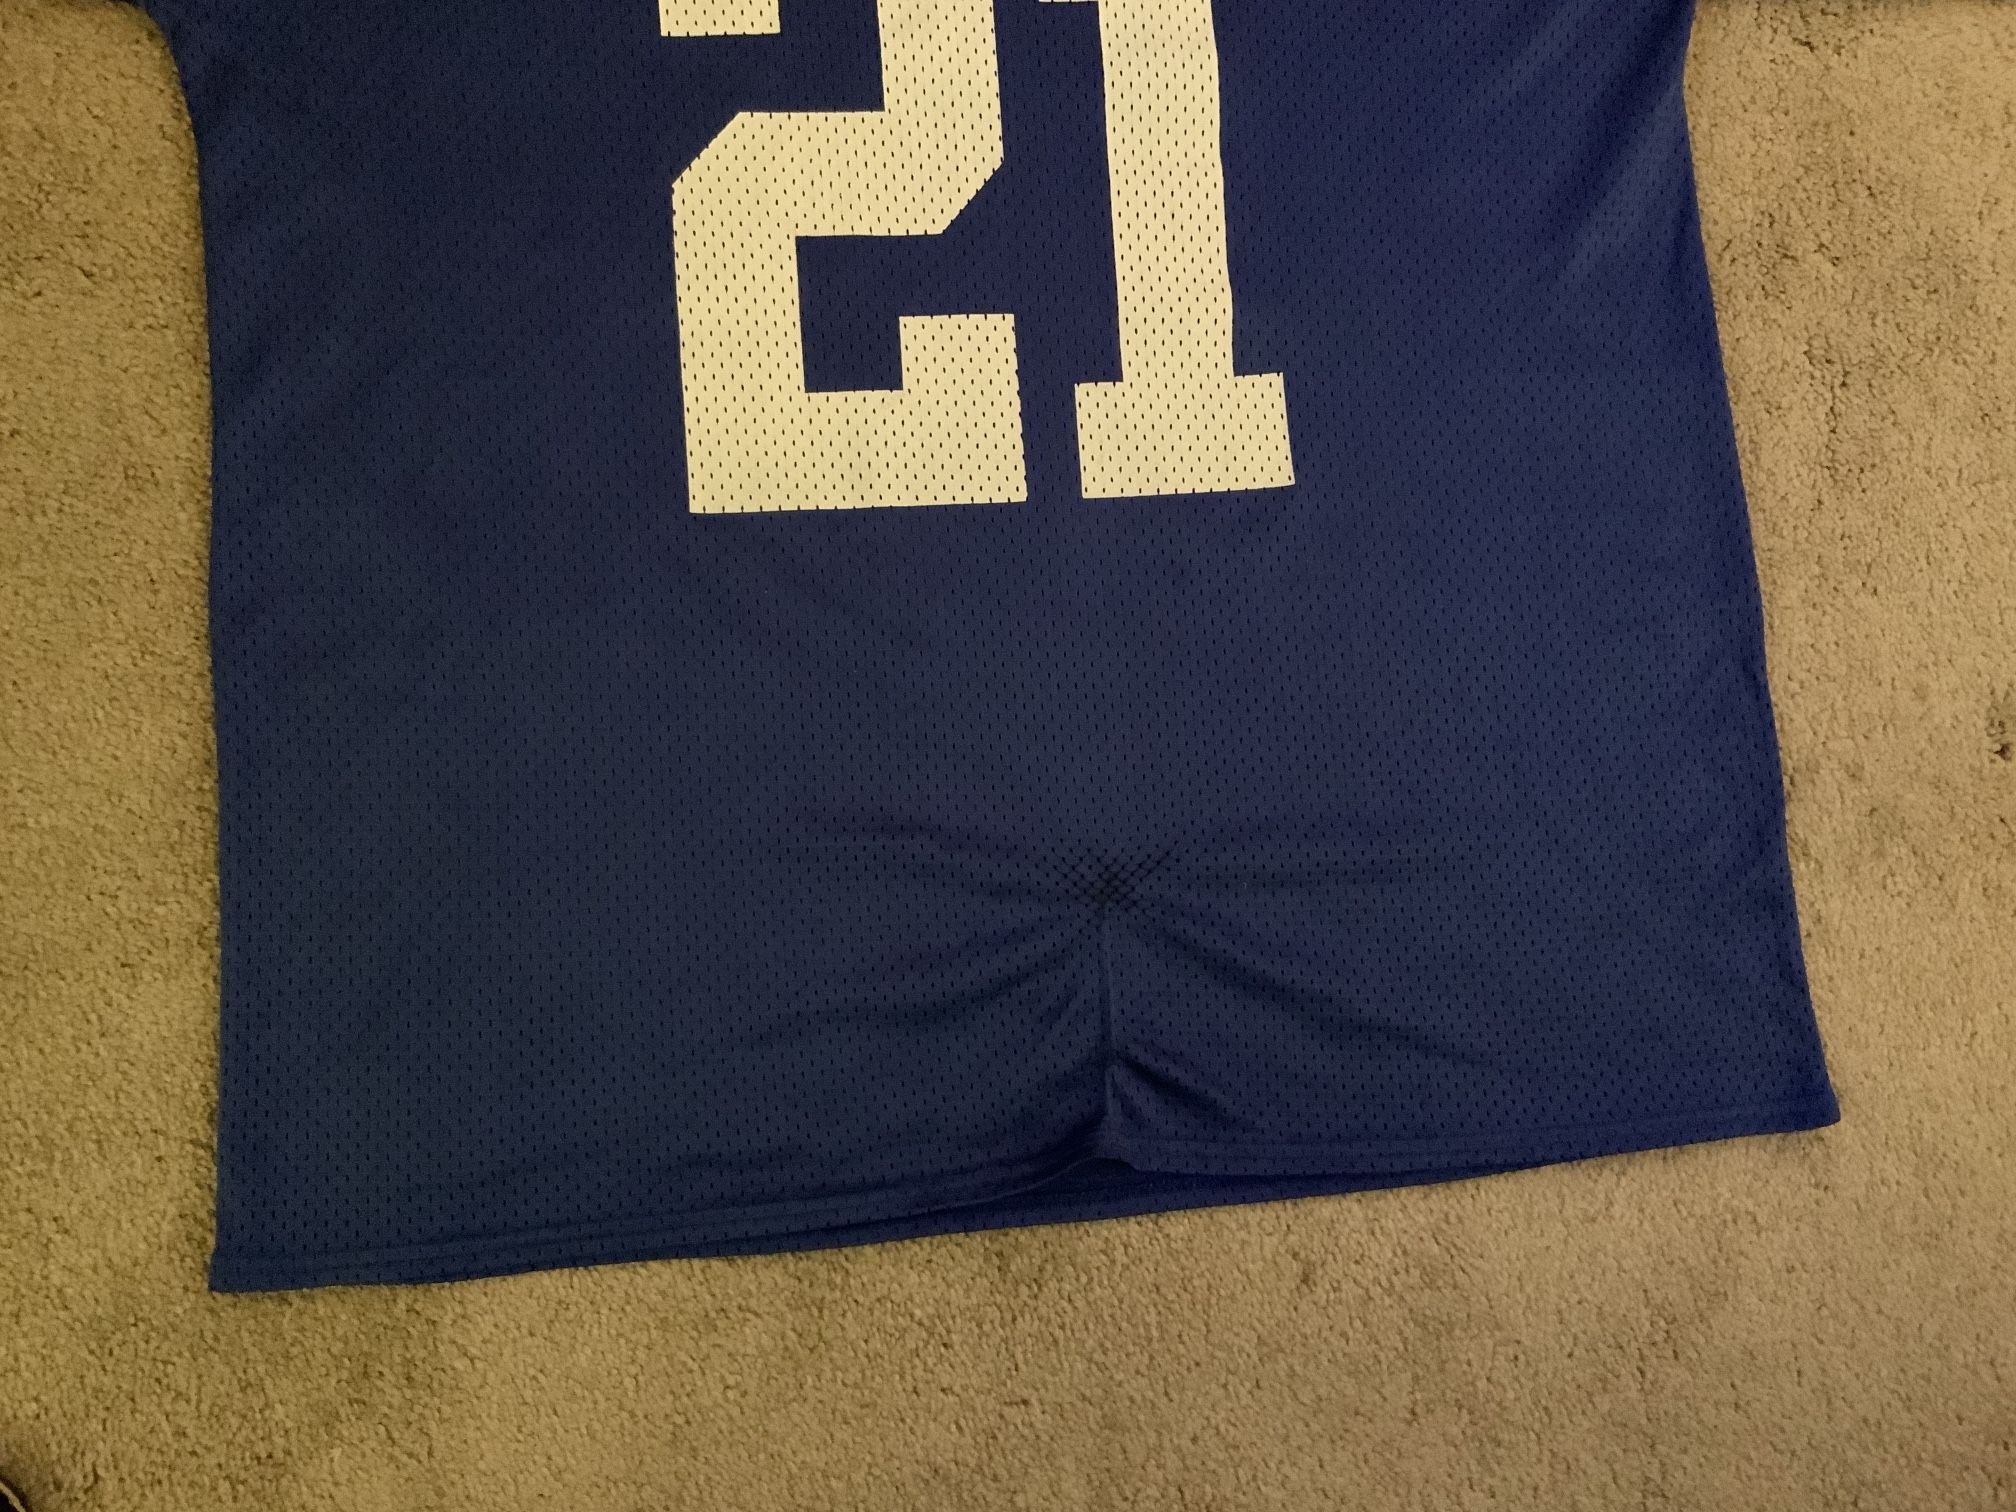 NY Giants Tiki Barber Home And Away Jersey Size Large for Sale in Maywood,  NJ - OfferUp